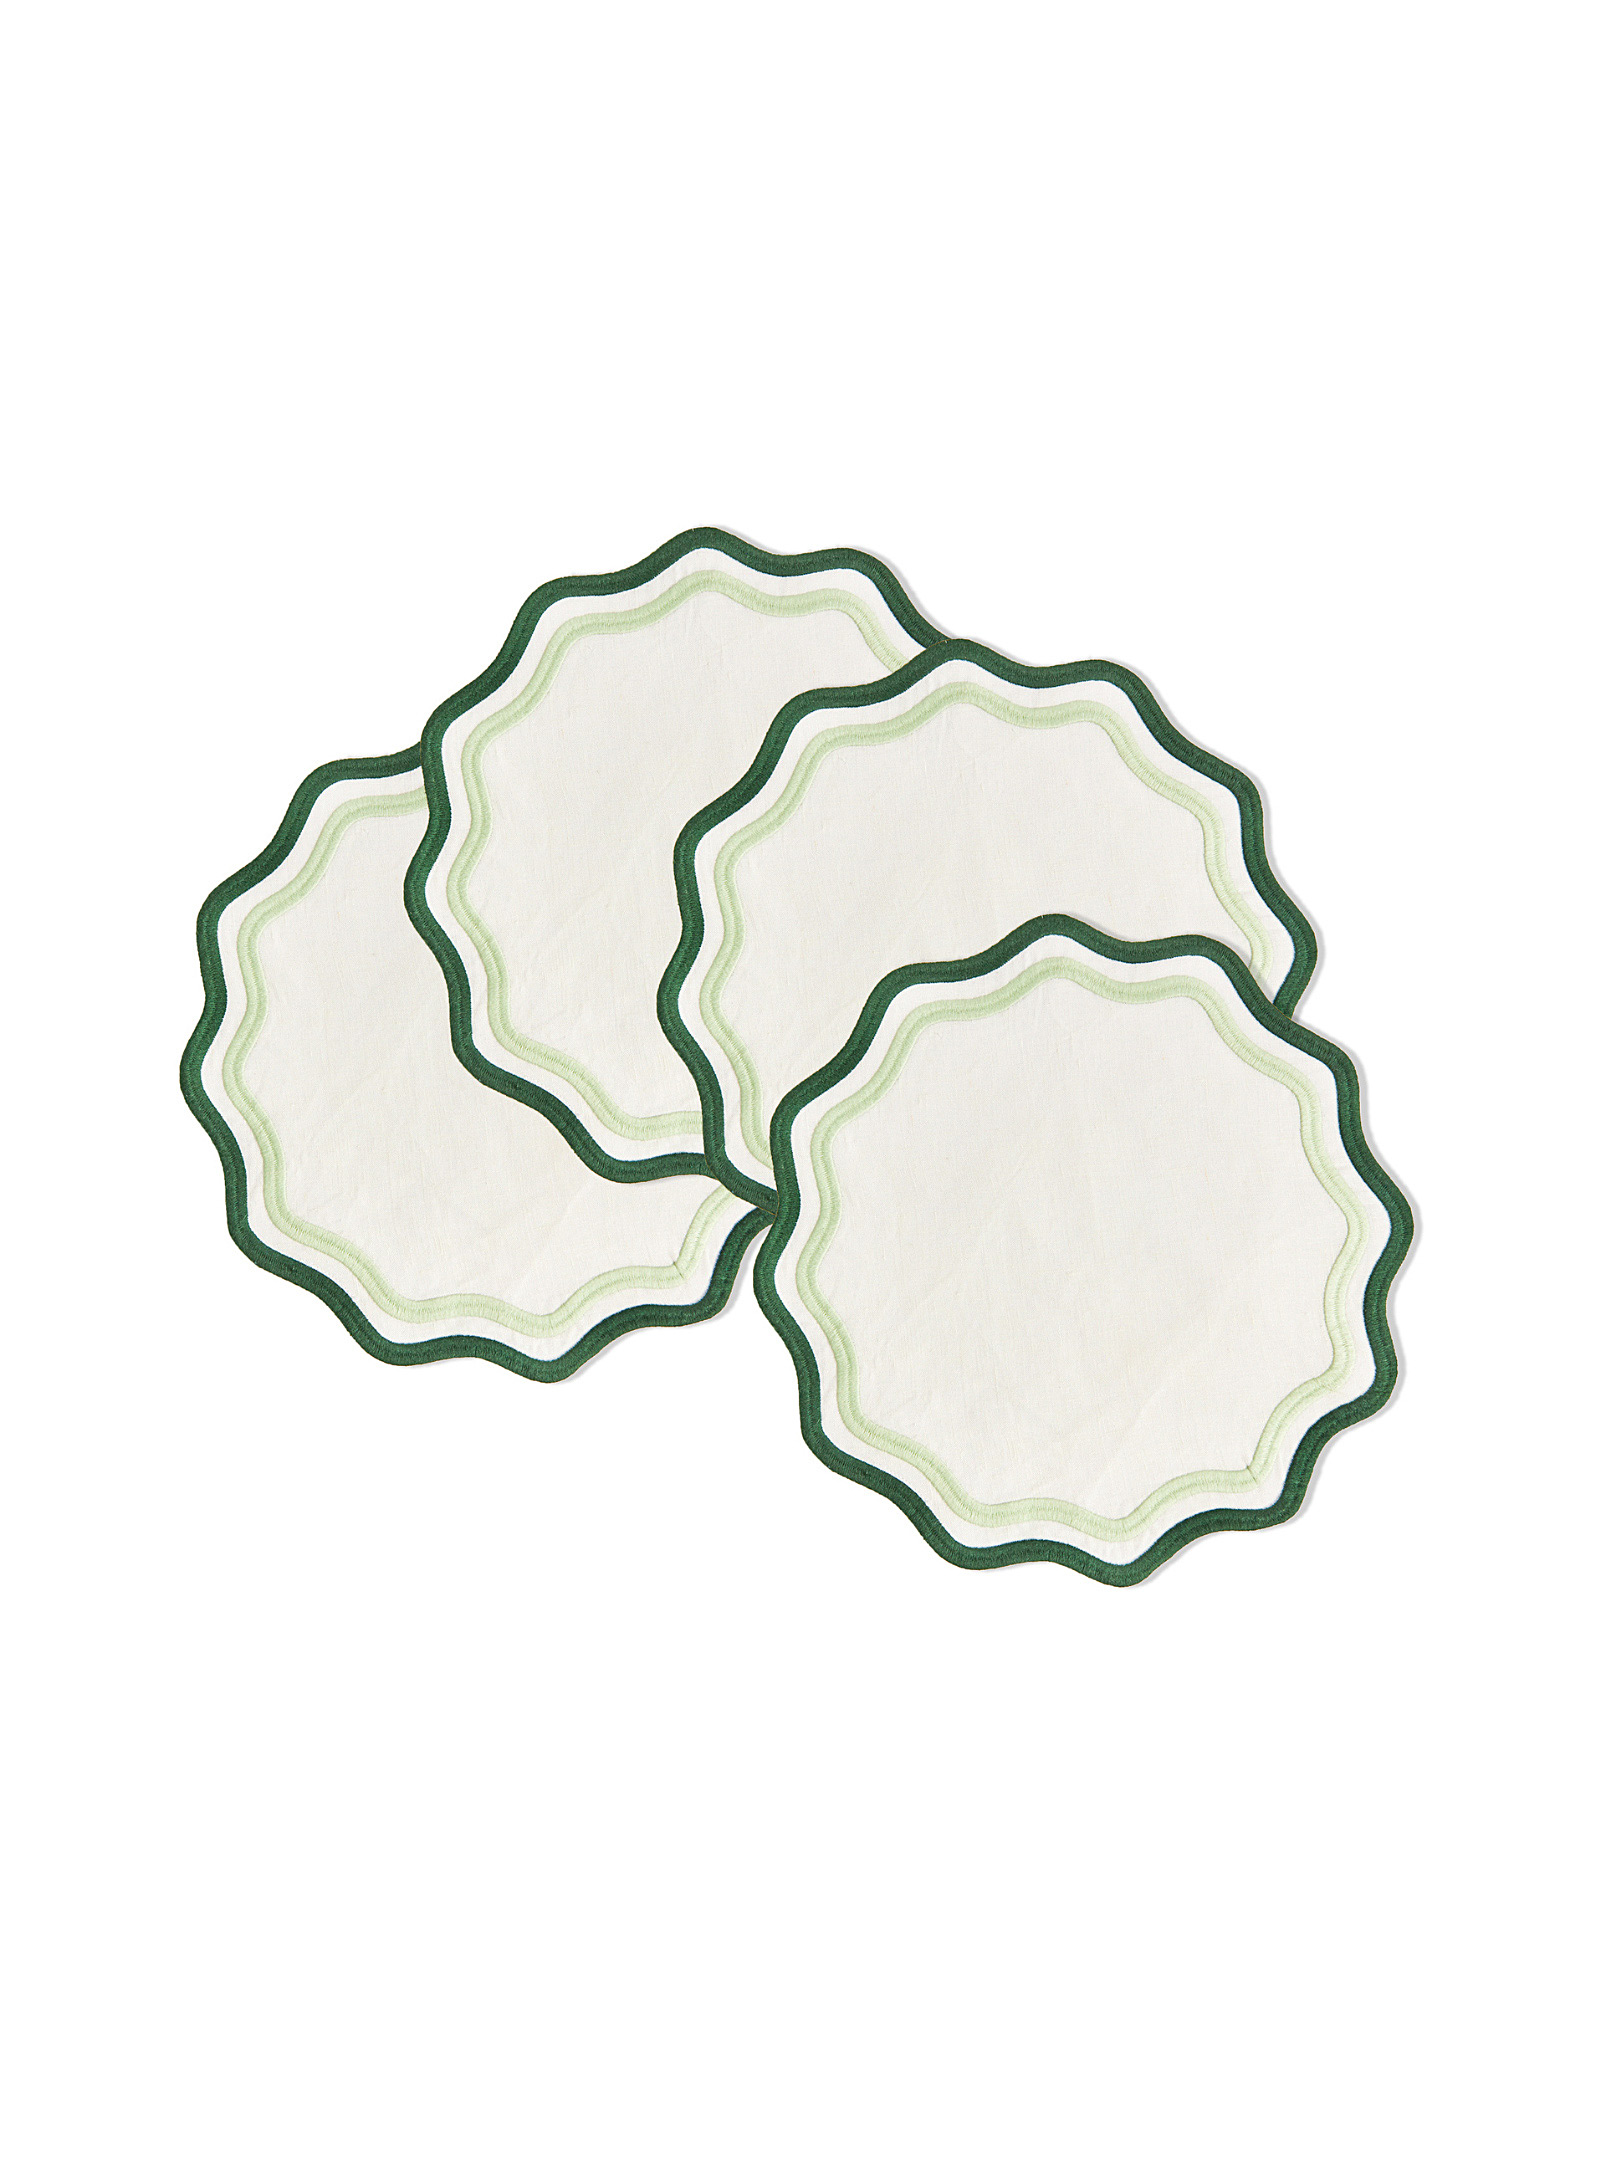 Misette Contrasting Trim Wavy Placemats Set Of 4 In Mossy Green